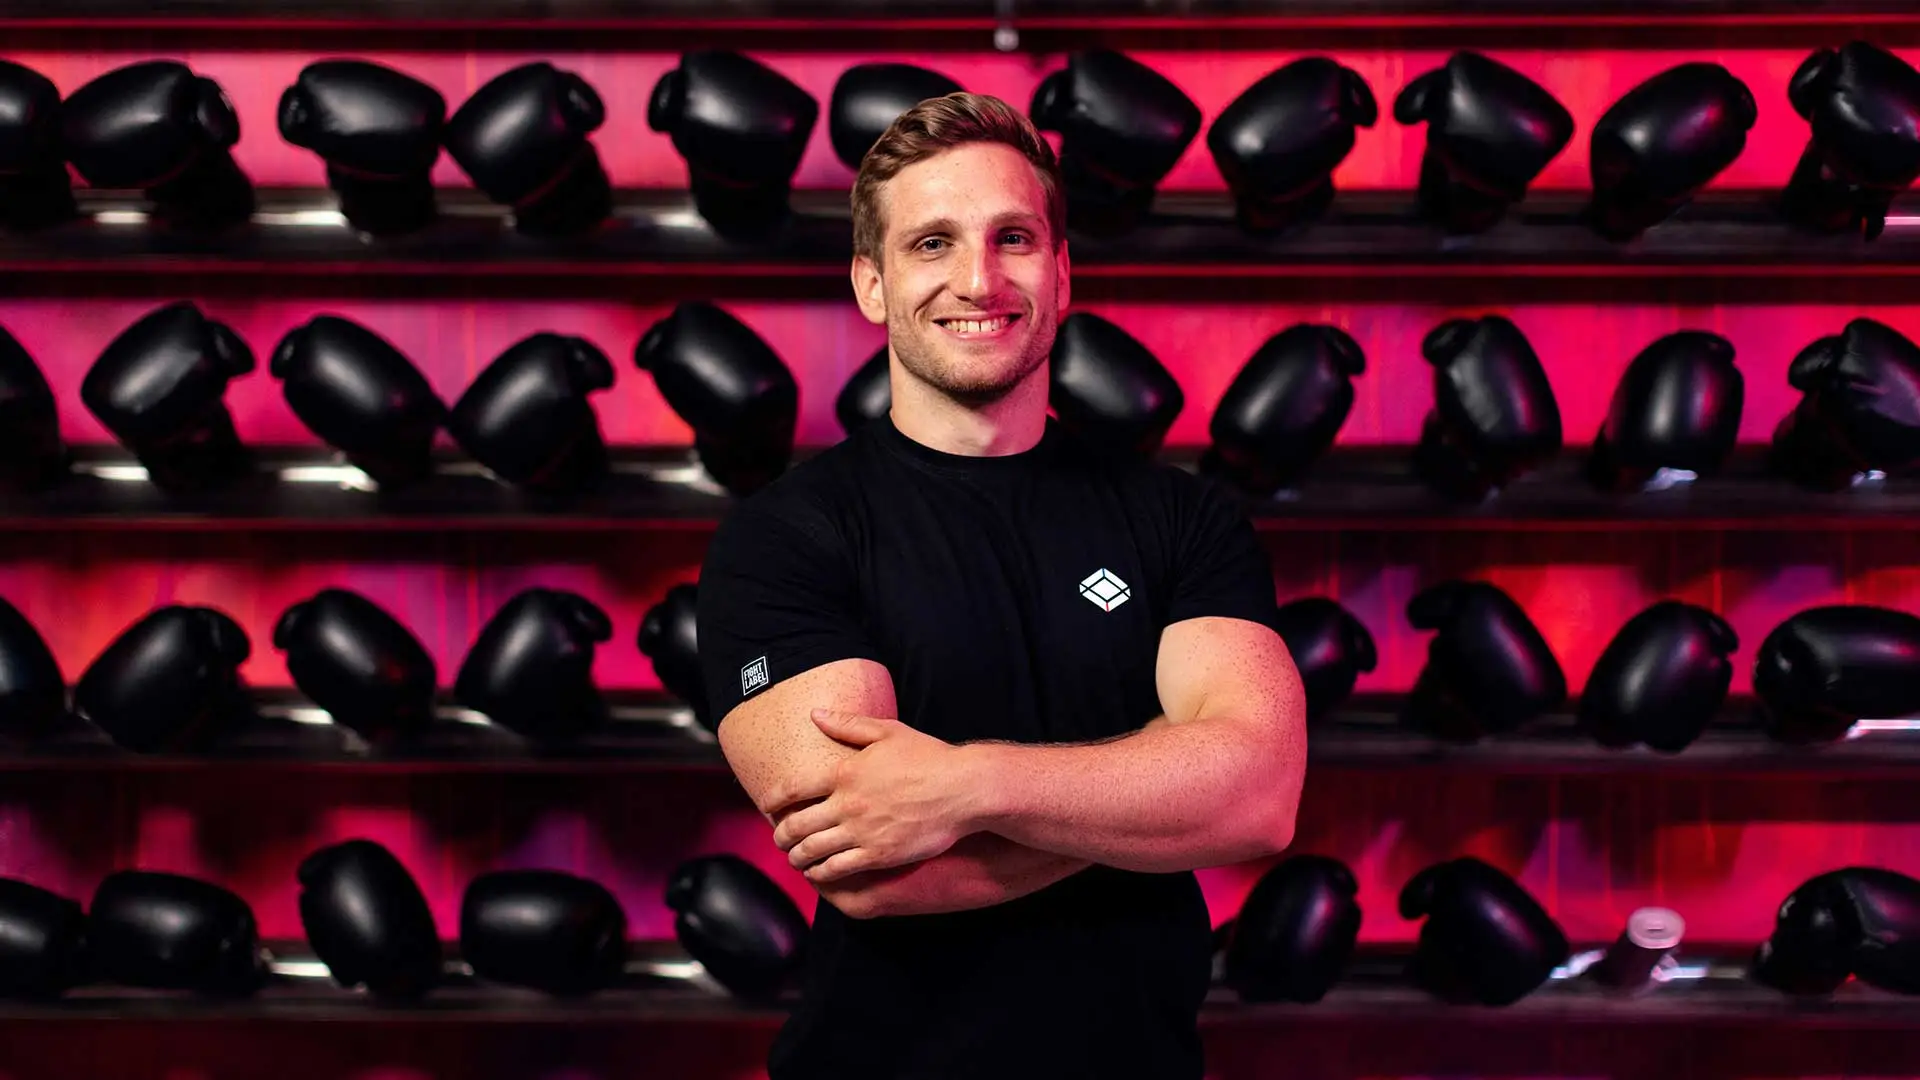 A trainer in front of a wall of boxing gloves needs insurance coverage for personal trainers